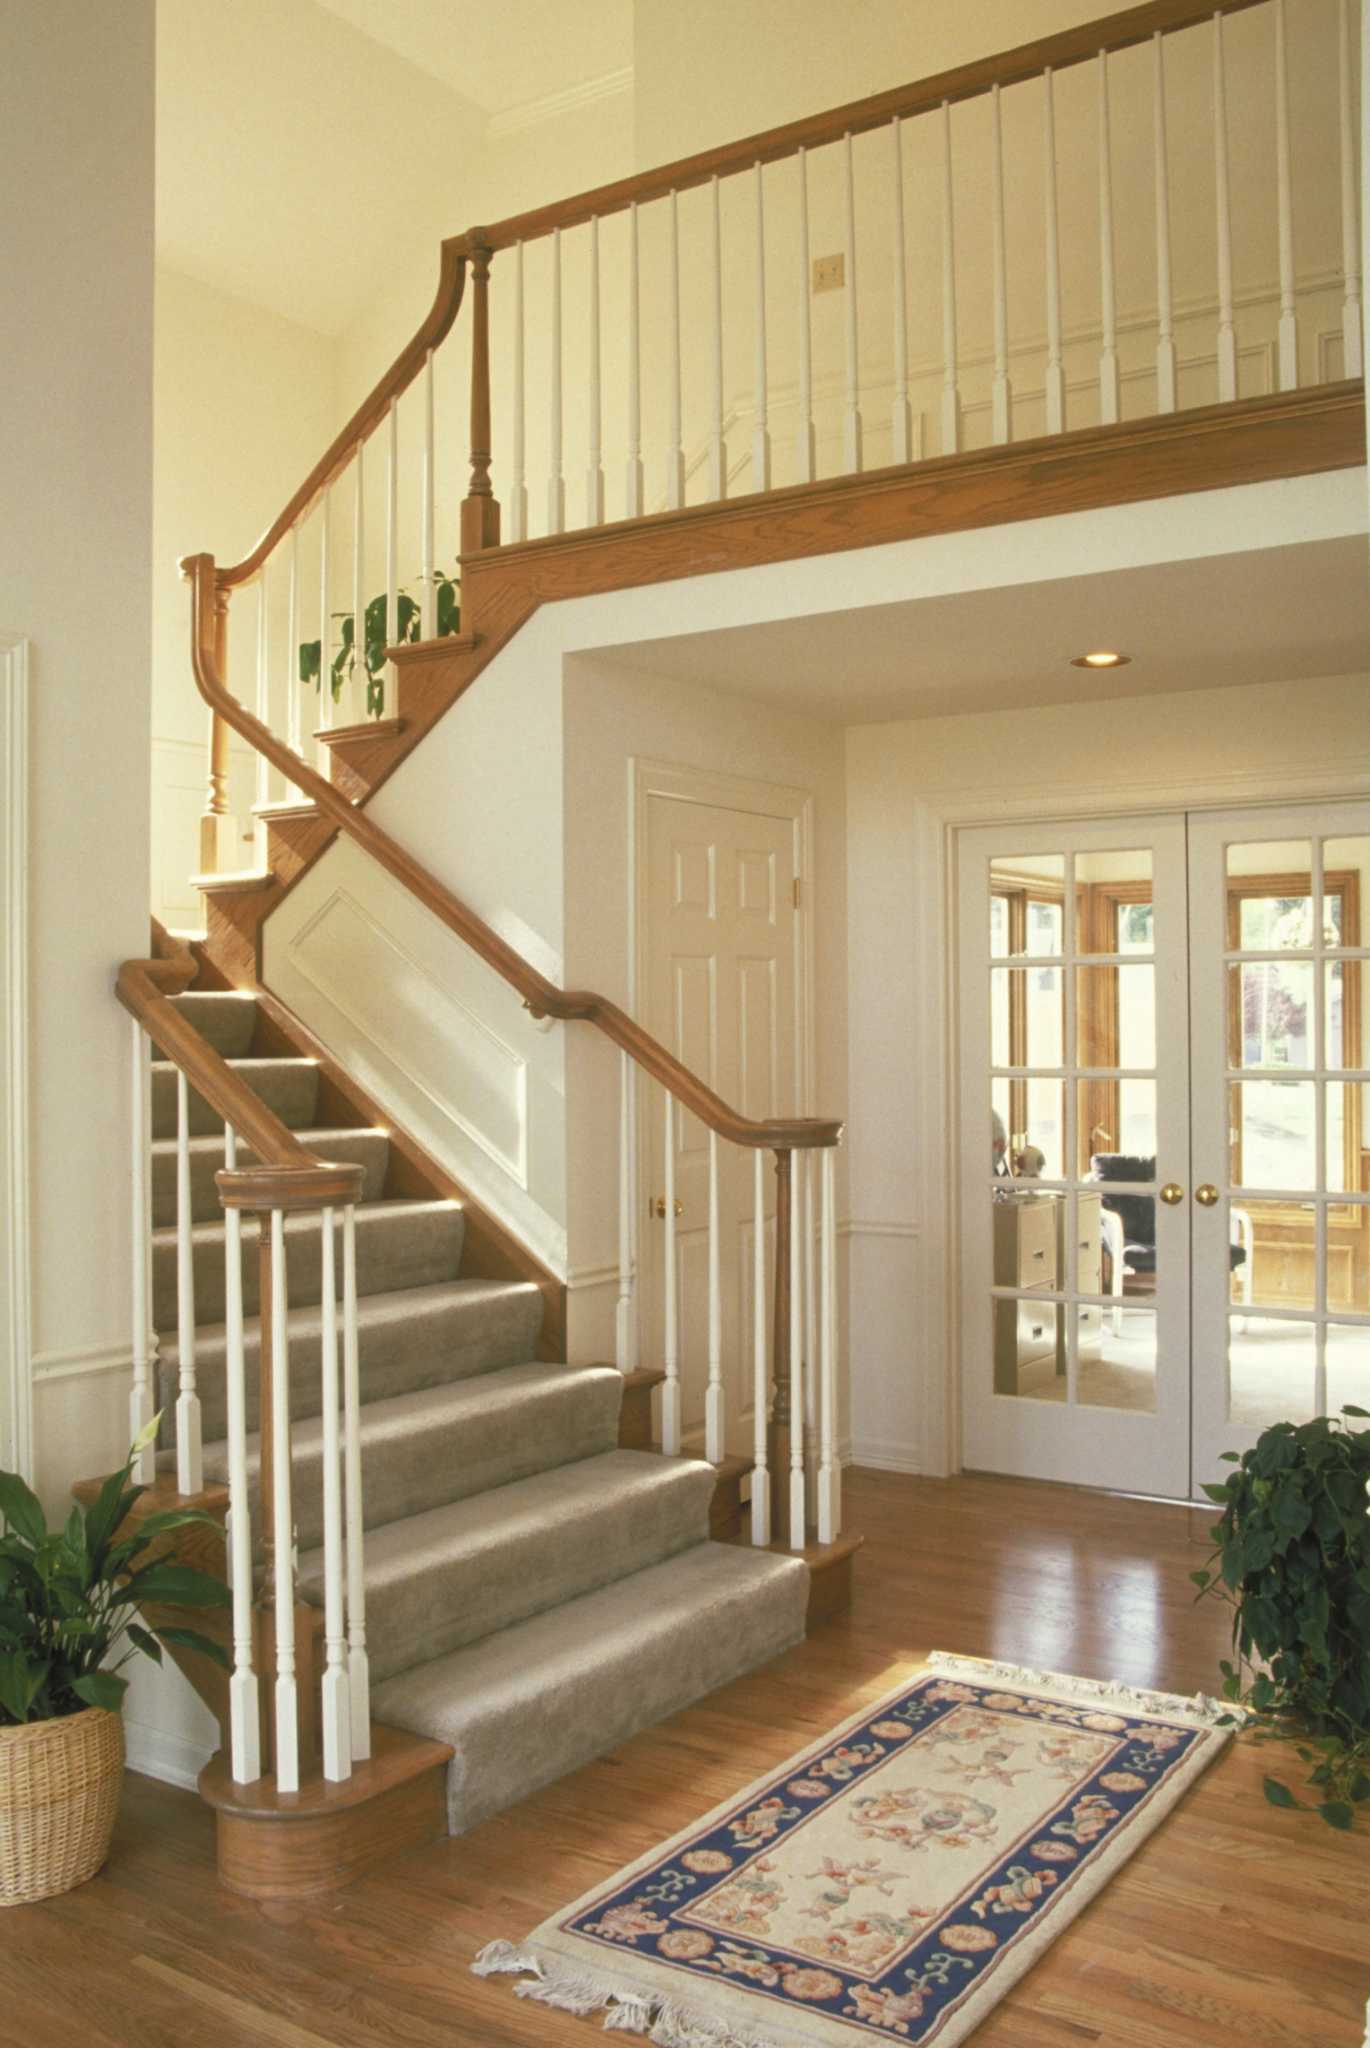 How To Install Carpeting On The Stairs